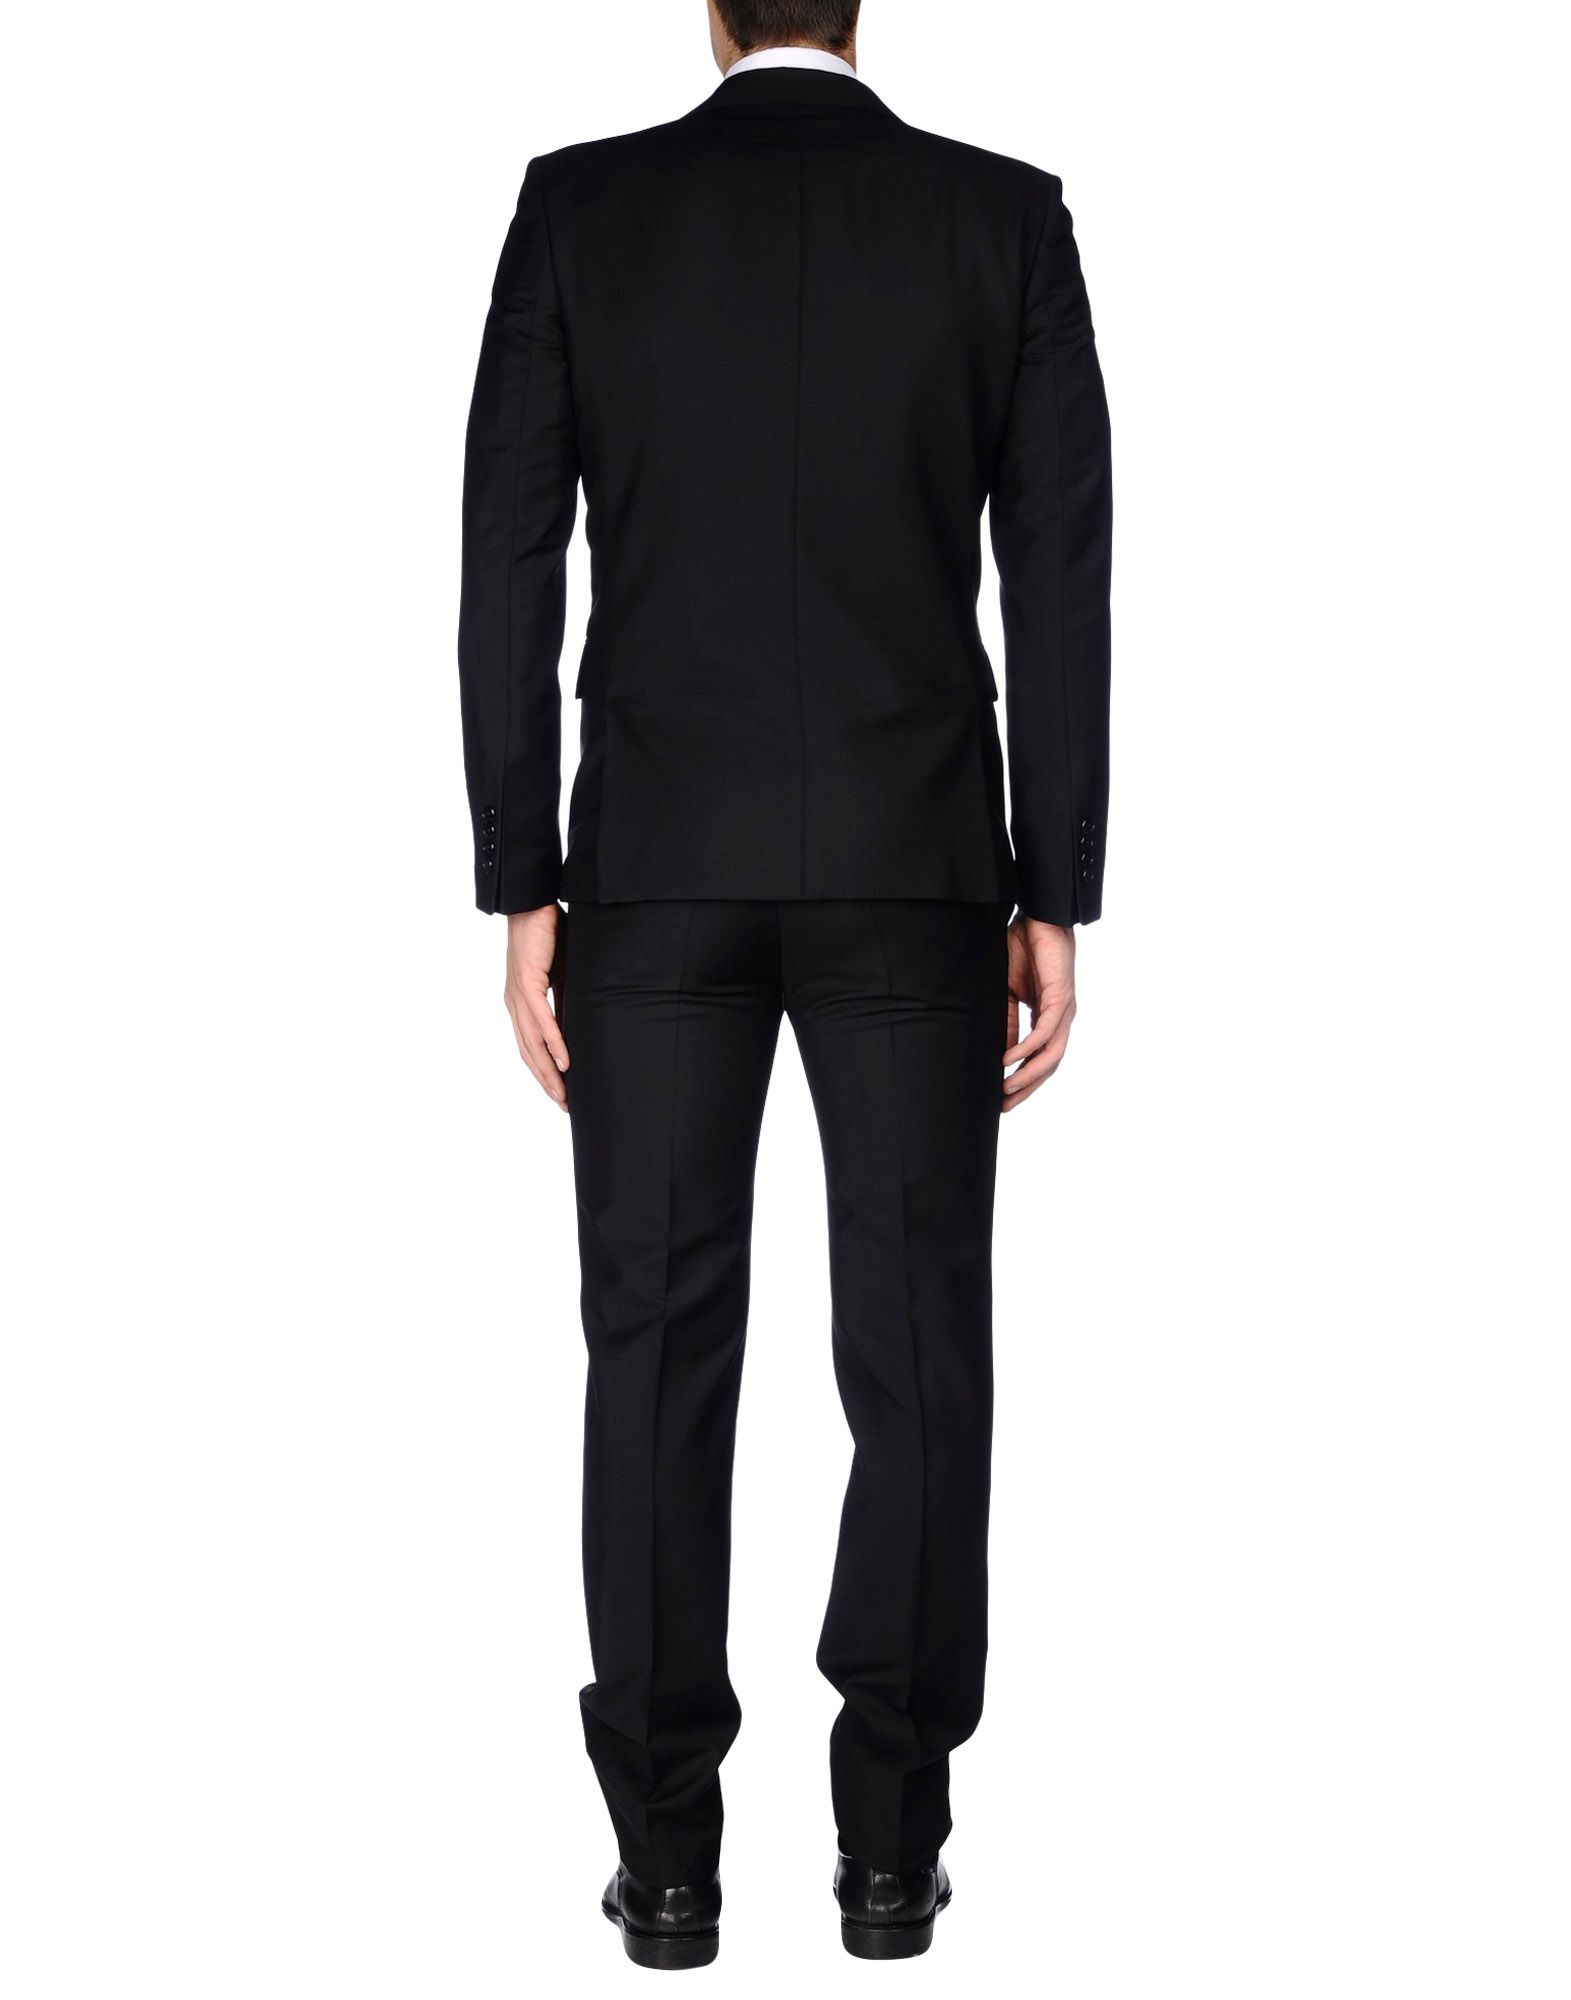 Lyst - Givenchy Suit in Black for Men